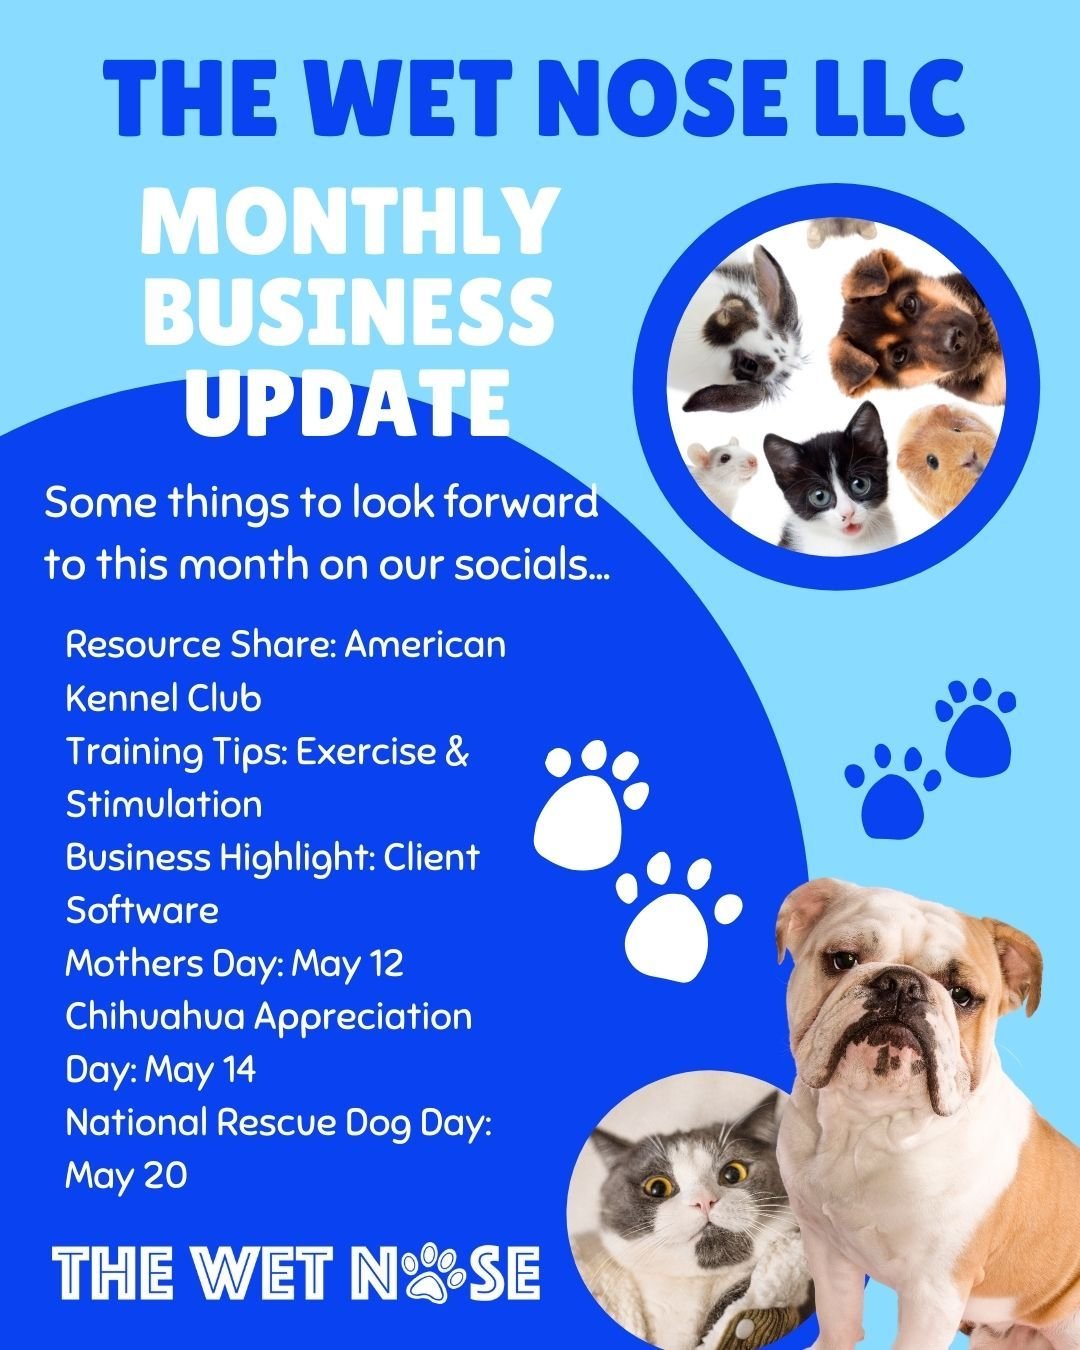 🌟 May Updates at The Wet Nose LLC! 🐾

Get ready for a month packed with tail-wagging excitement and valuable insights on our socials! Here's what's in store:

📅 Mark your calendars! We're celebrating National Rescue Dog Day and Chihuahua Appreciat